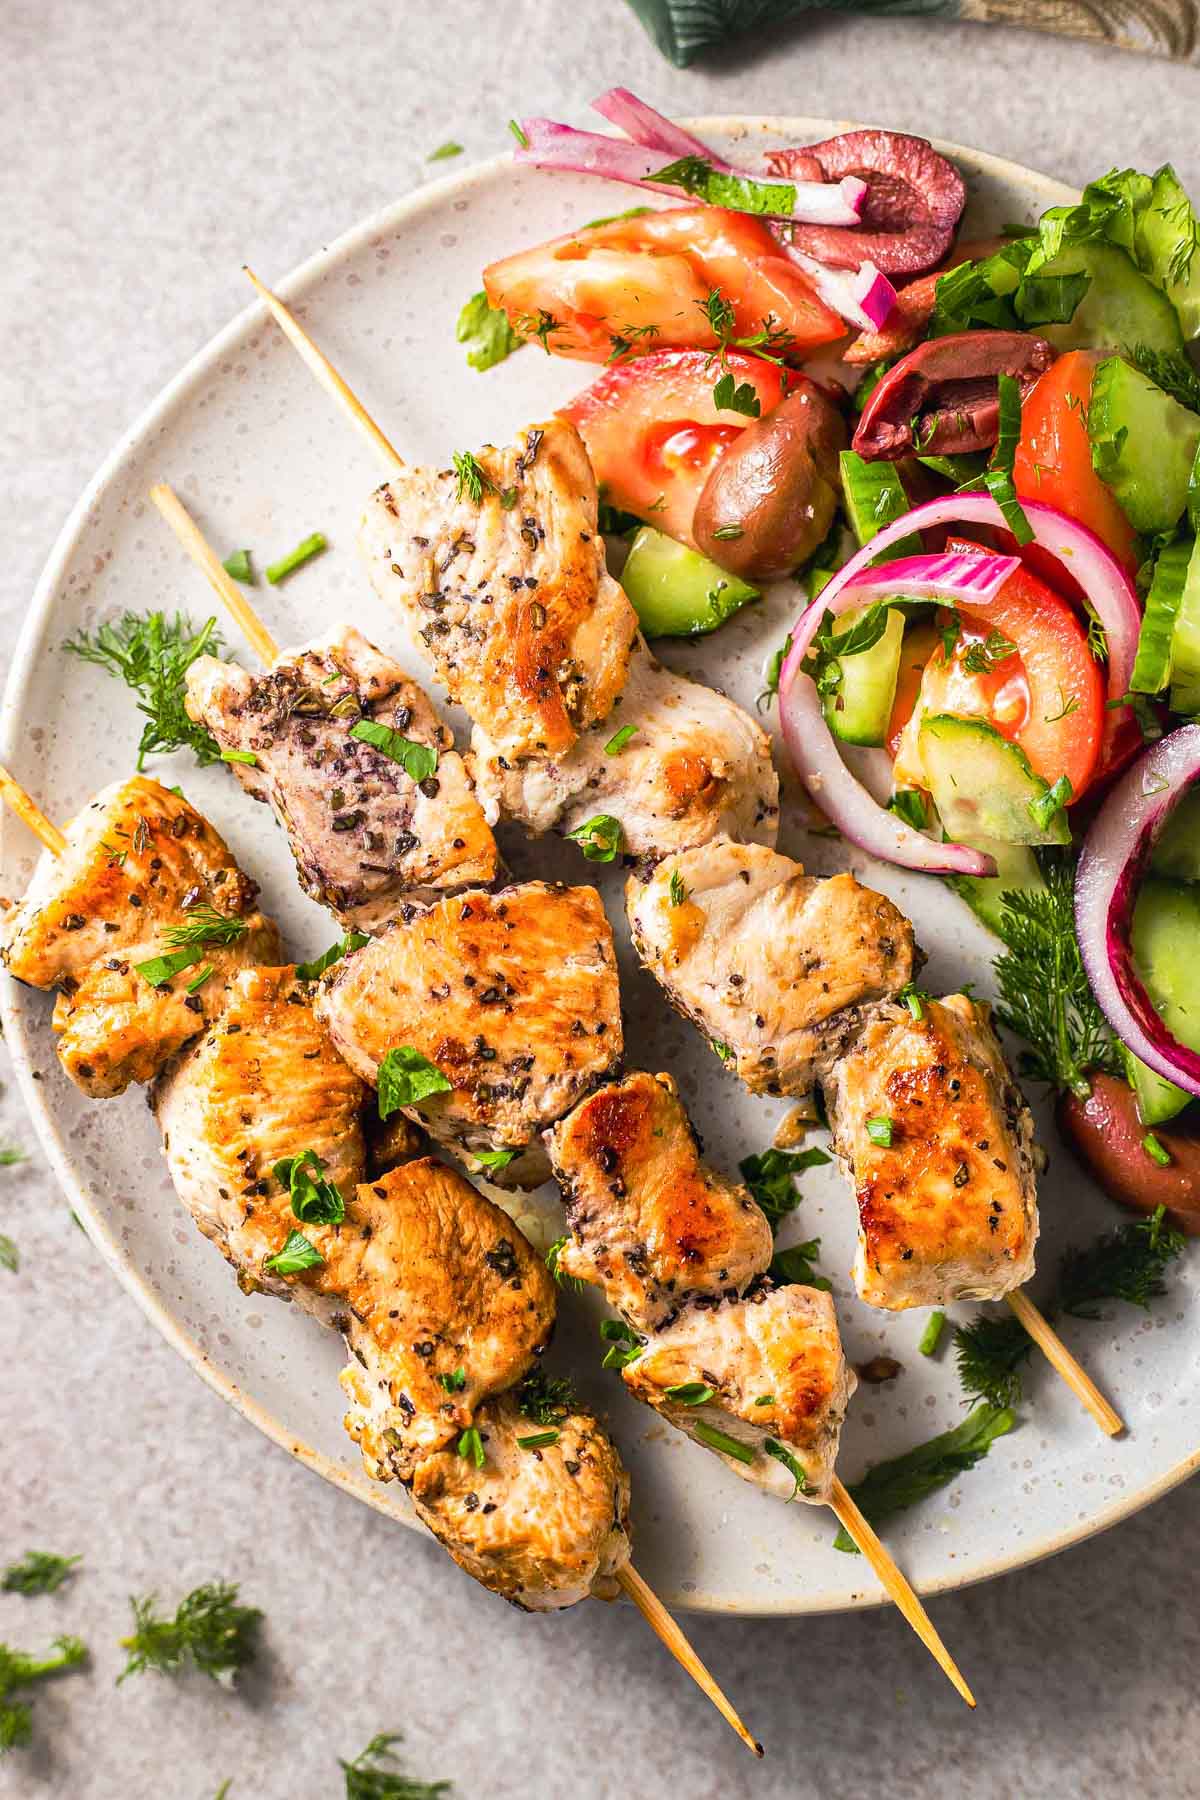 grilled pieces of chicken on wooden skewers on white plate with salad beside.